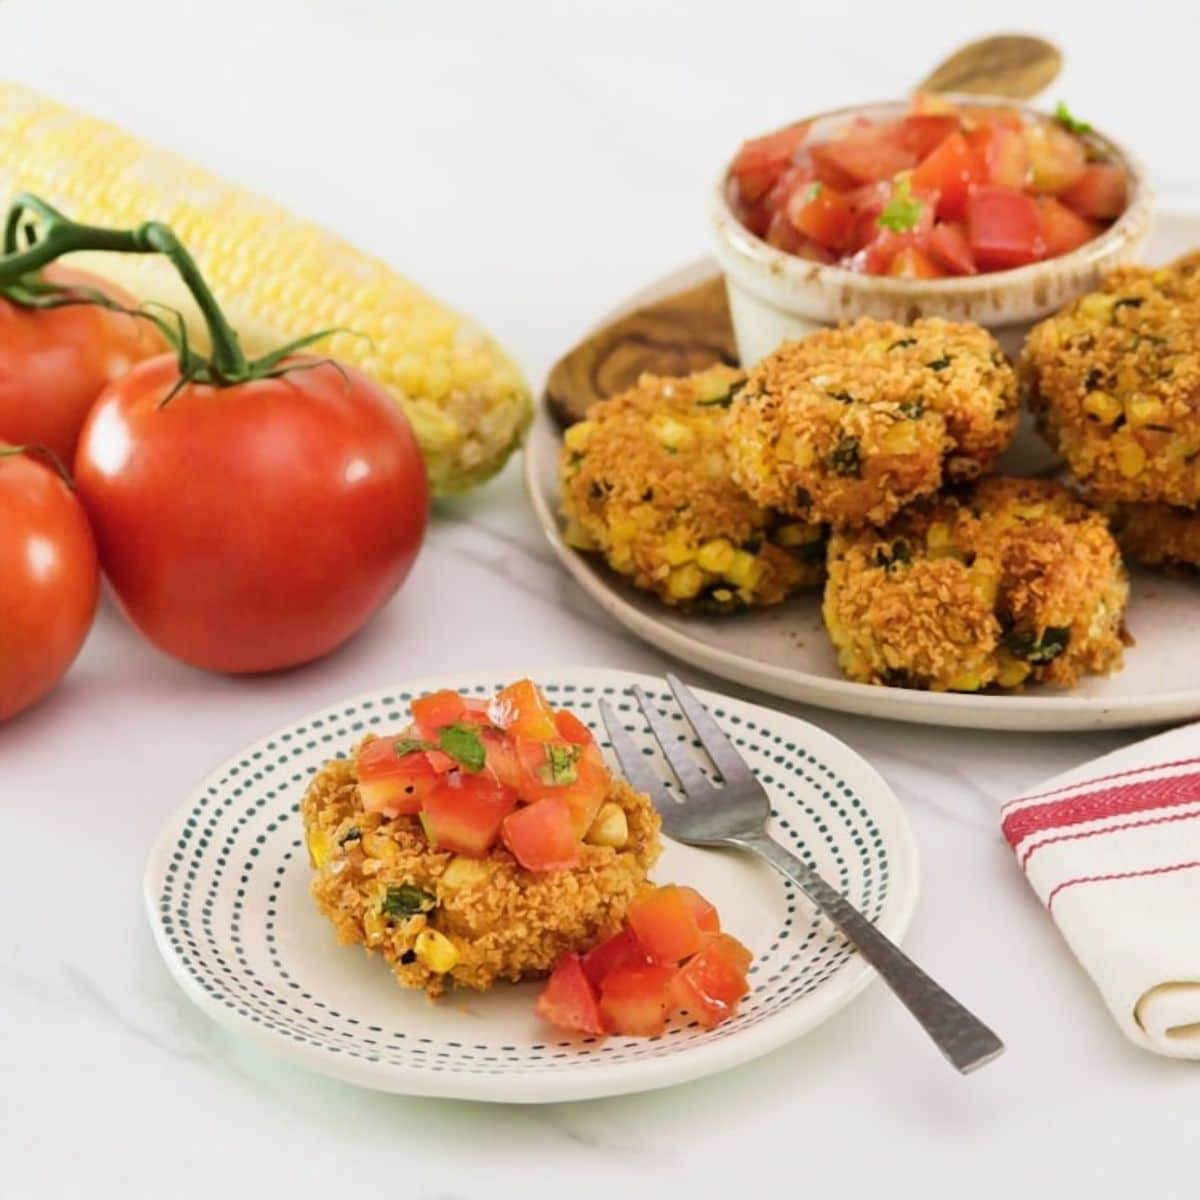 Panko corn and pepper schnitzel, topped with tomato relish on a small plate with a fork. In the background there is a plate to the right with more schnitzel and relish, to the left there are whole tomatoes.